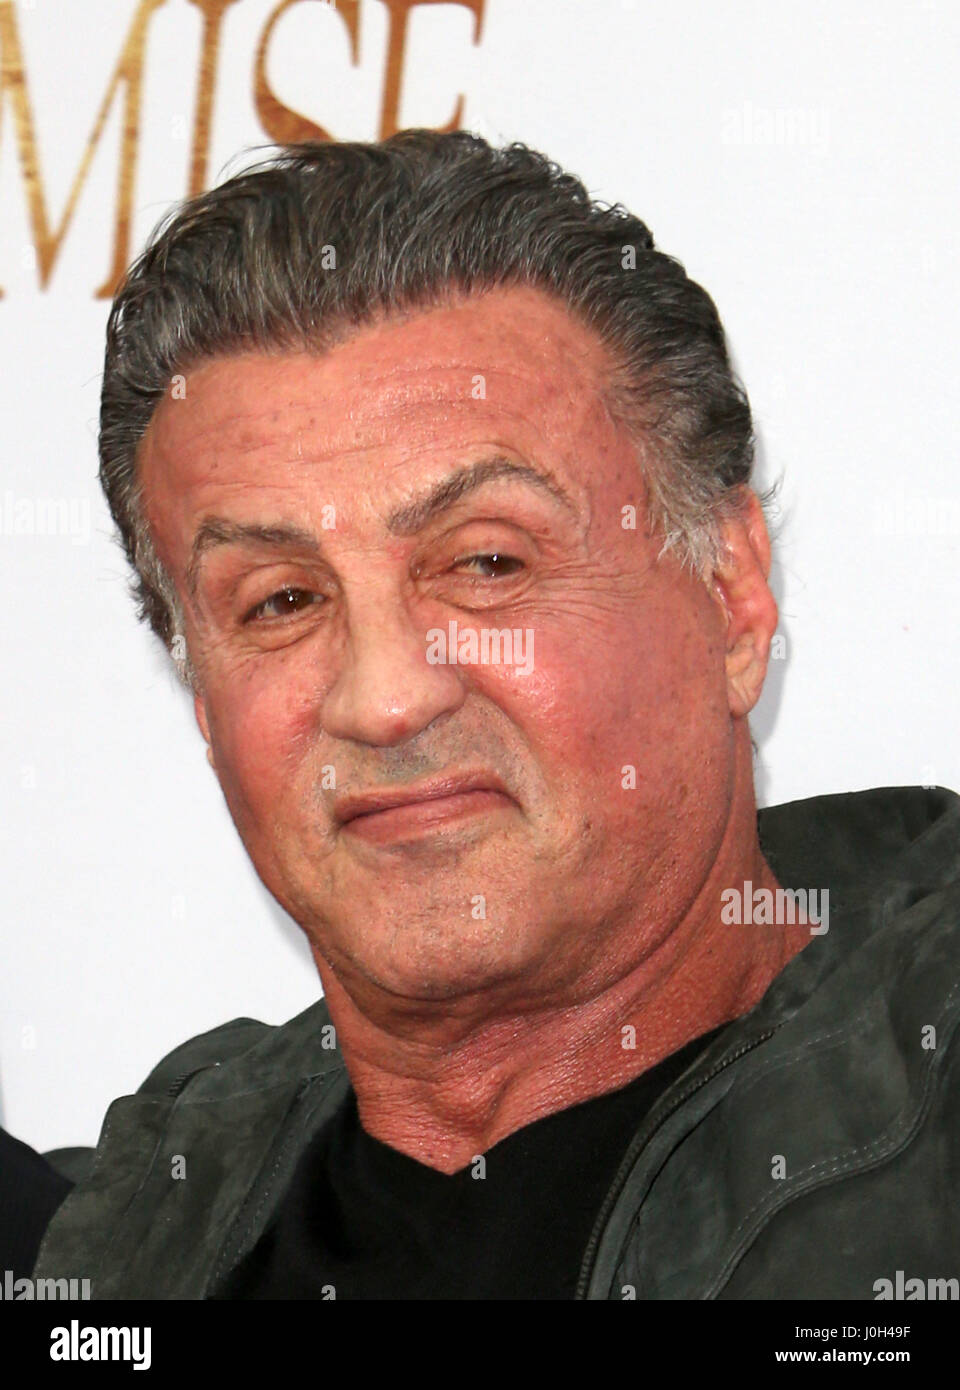 Hollywood, Ca. 12th Apr, 2017. Sylvester Stallone, at Premiere Of Open Road Films' 'The Promise' at TCL Chinese Theatre IMAX In California on April 12, 2017. Credit: Fs/Media Punch/Alamy Live News Stock Photo